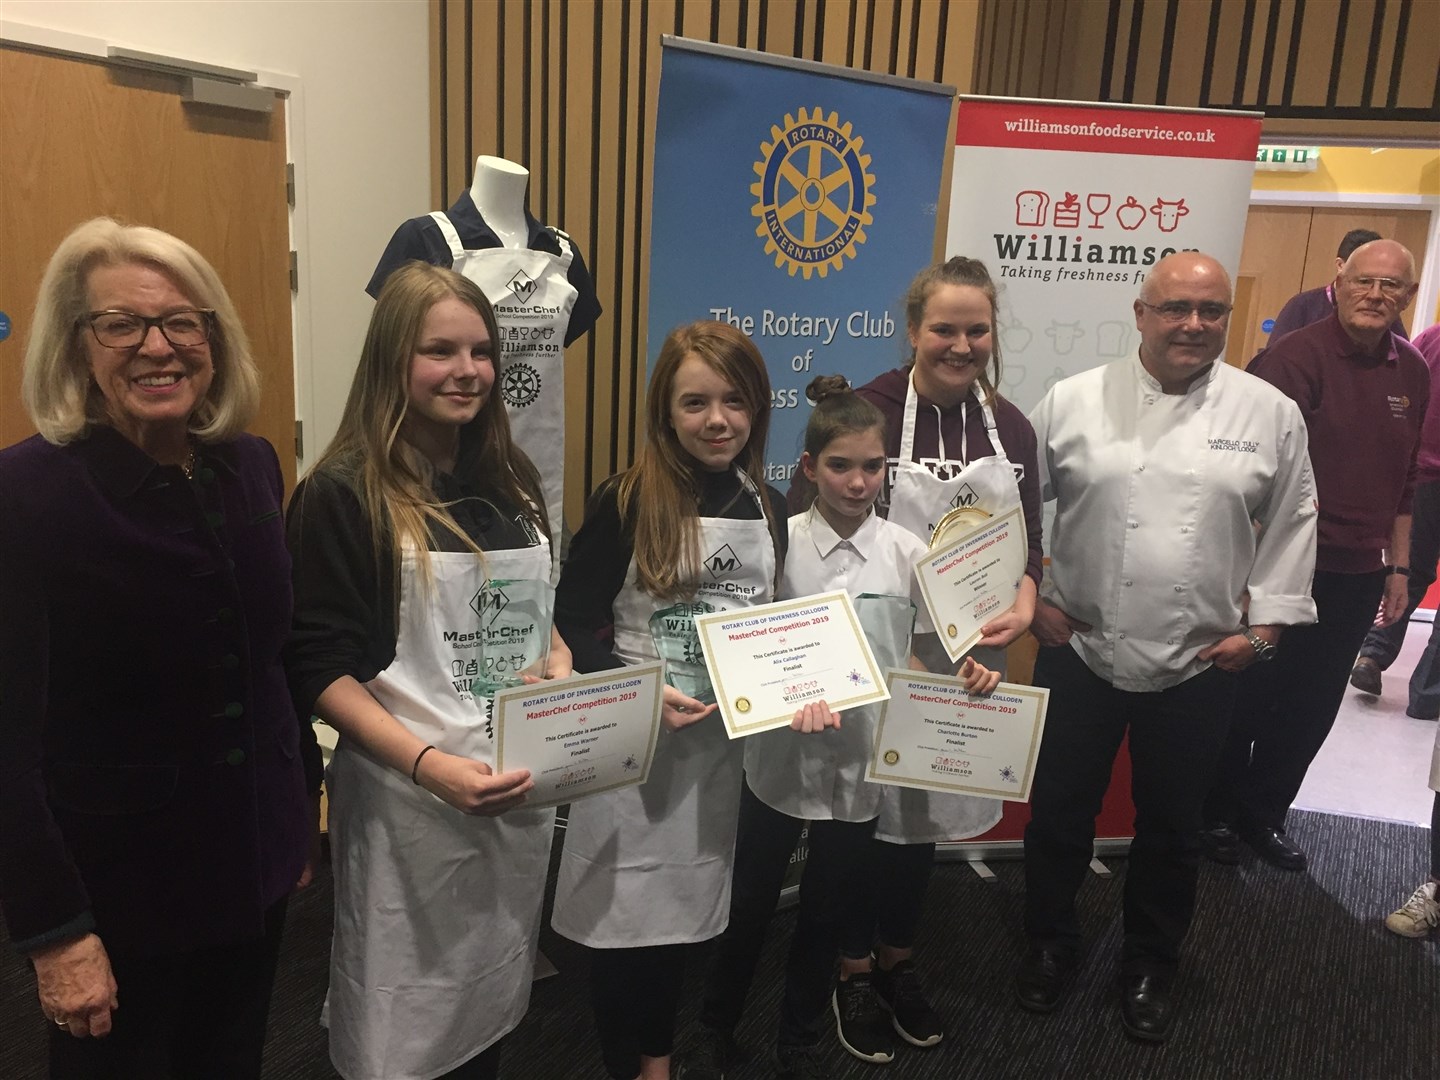 Schools Masterchef finalists with judges Lady Claire Macdonald (left) and Marcello Tully from Kinloch Lodge Hotel, Skye. Finalists (l-r): Emma Warner, Inverness High School; Alix Callaghan, Fortrose Academy; Charlotte Burton, Inverness Royal Academy; Lauren Bell, Dingwall Academy (winner).